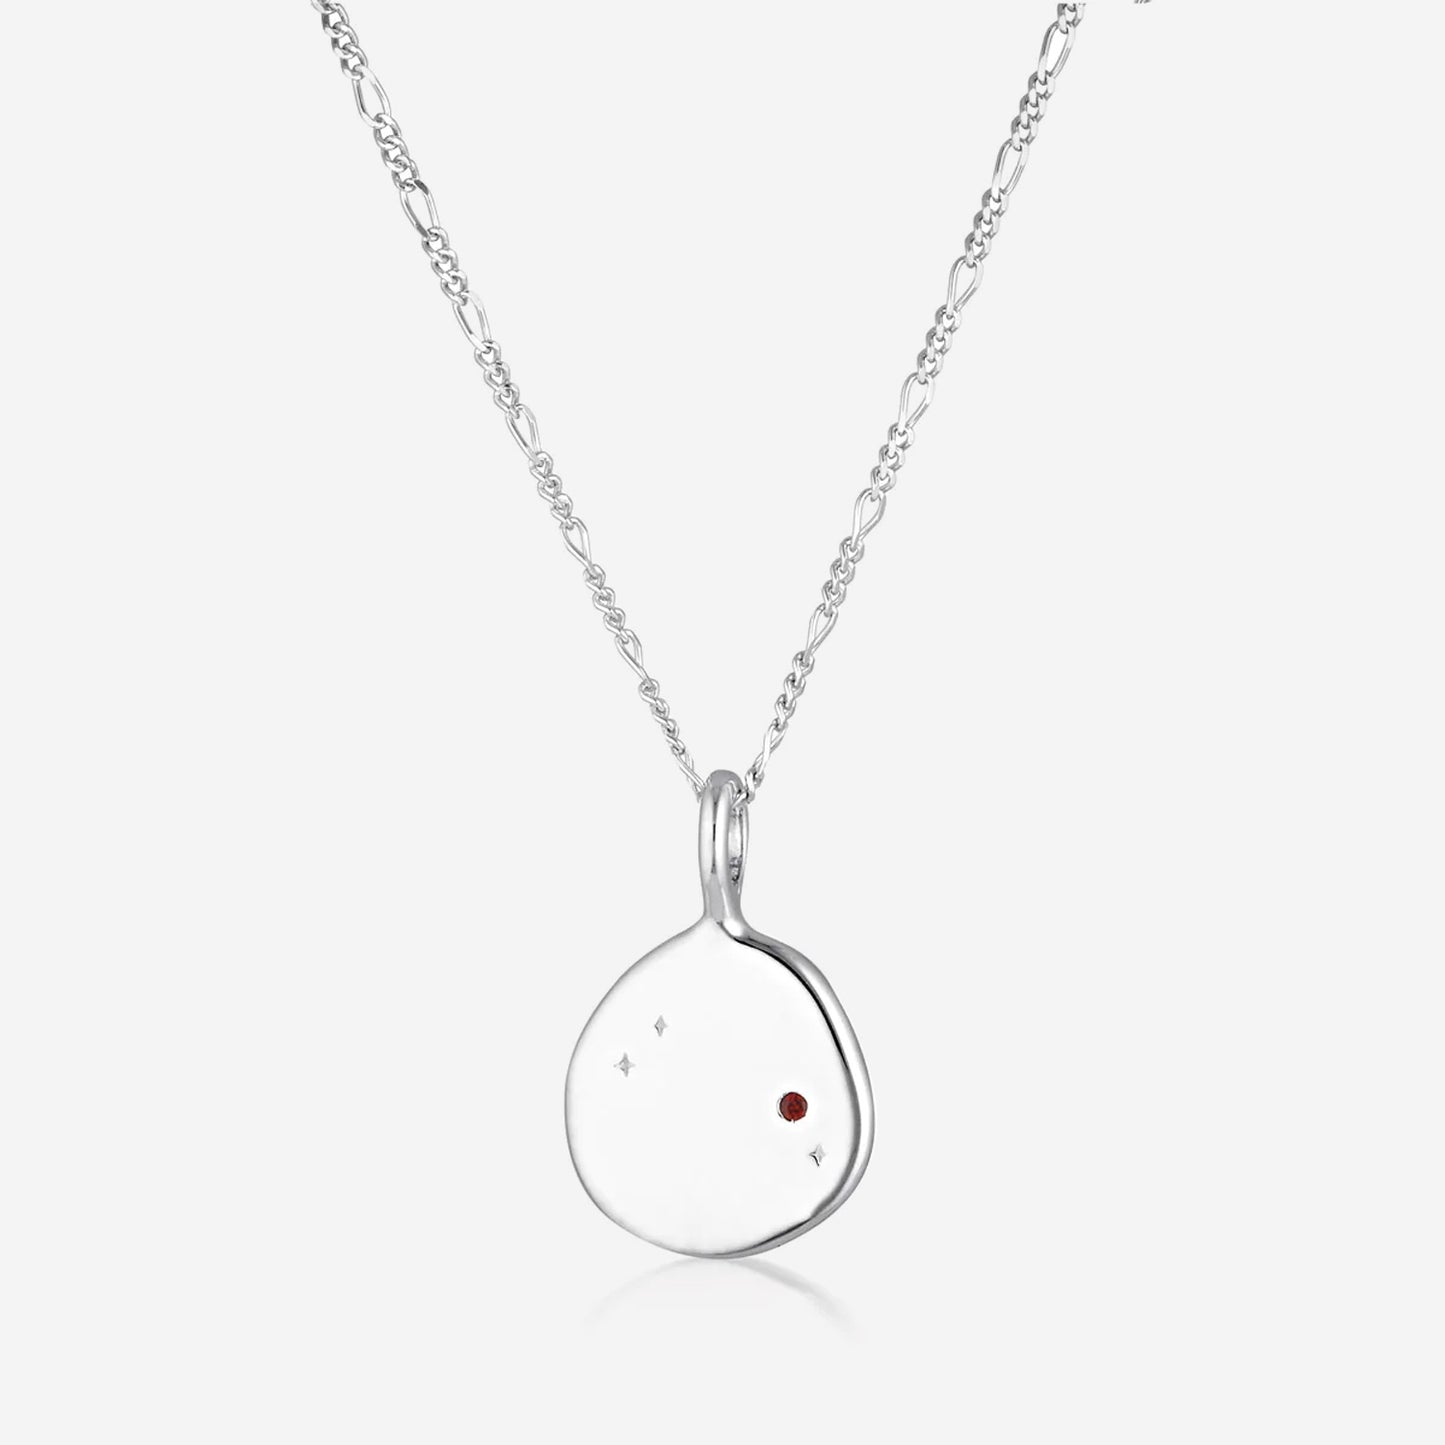 Linda Tahija - Zodiac Cable Necklace - Aries - Sterling Silver